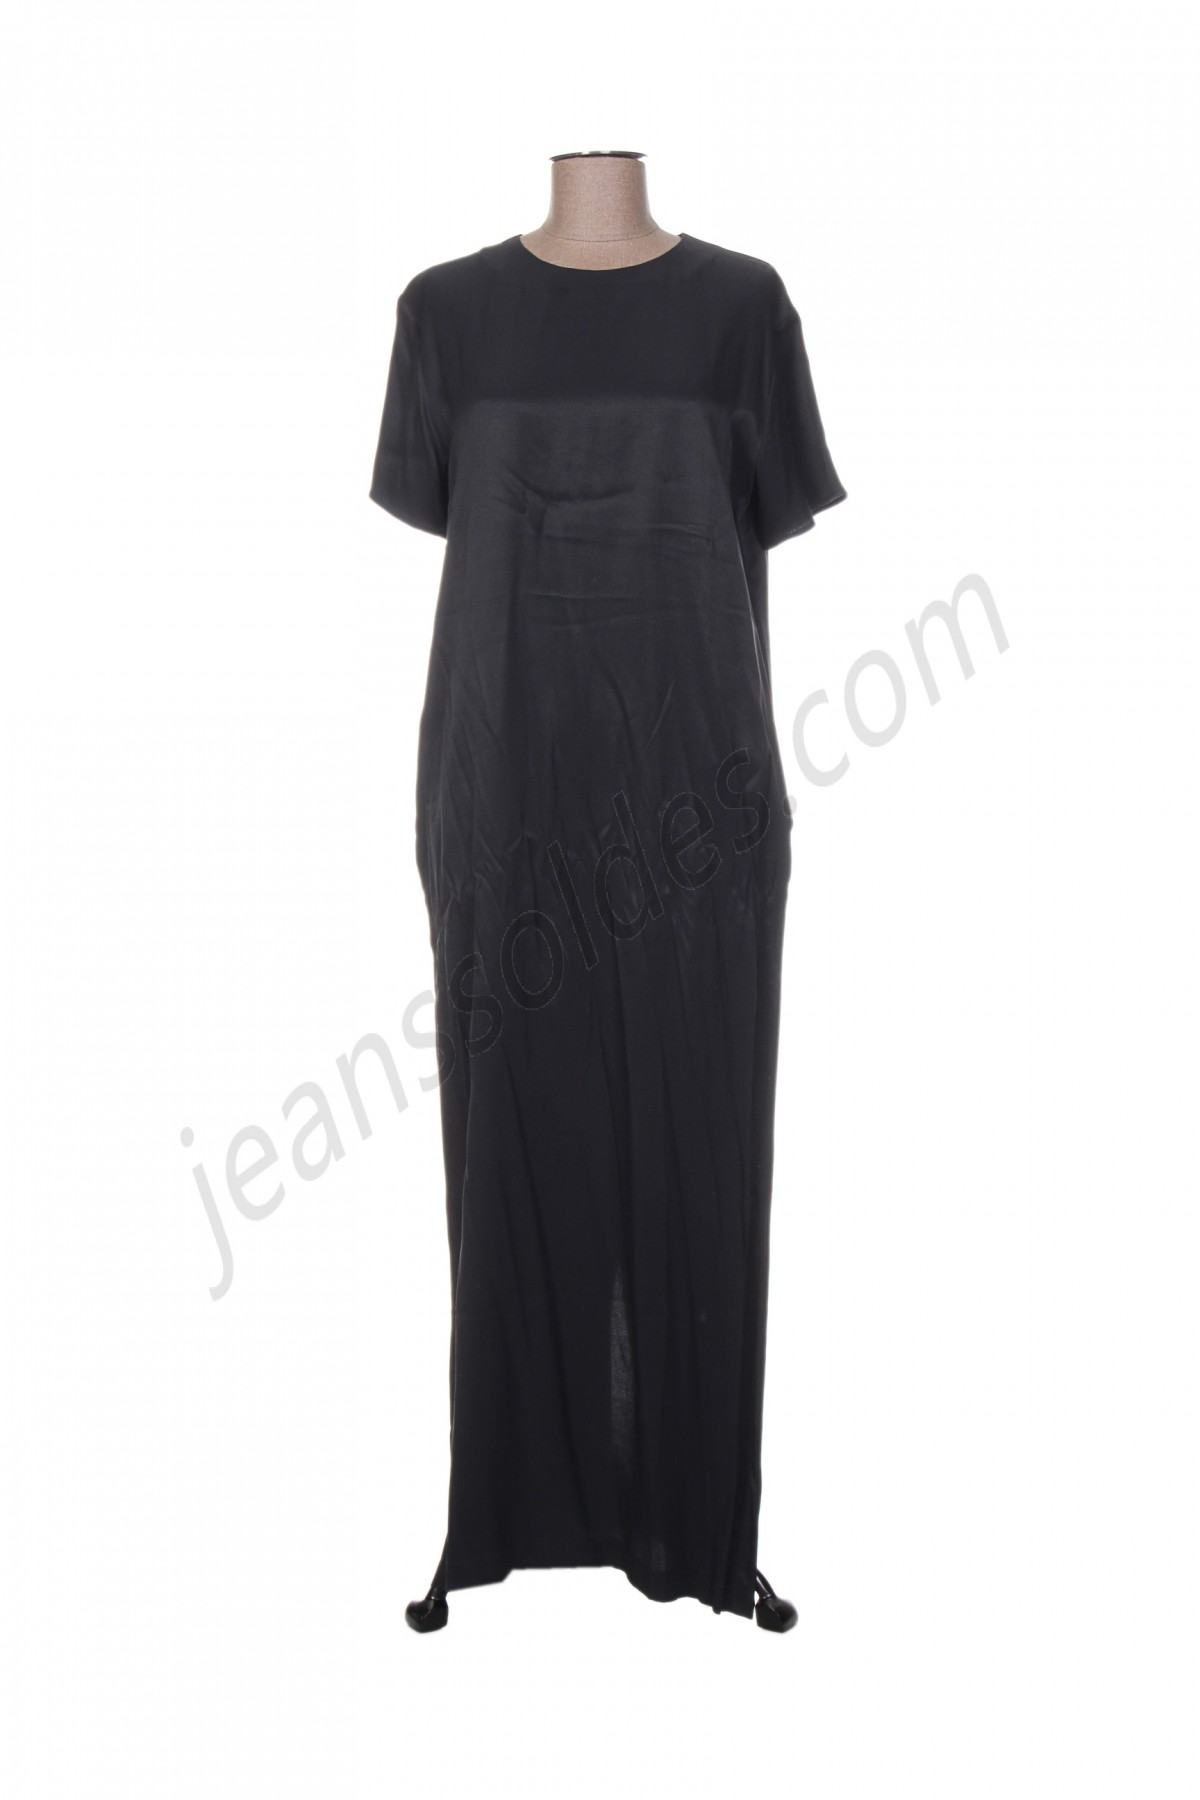 just in case-Robe longue déstockage - -0